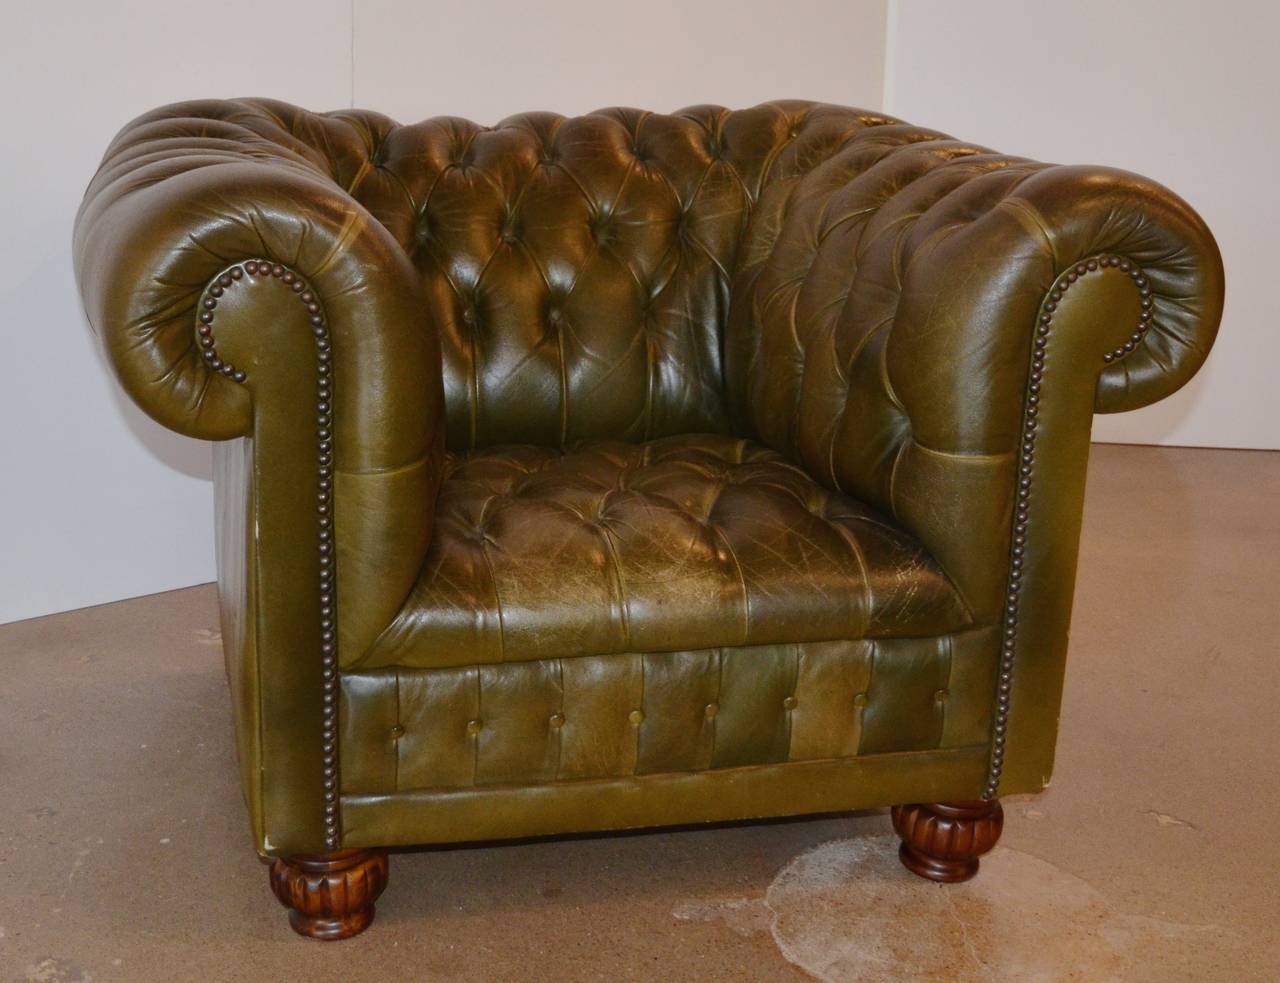 Vintage leather Chesterfield with beautiful color and patina. Tufted leather shows just the right amount of age to bring character and sophistication to any setting. Pair available.  See item LU114022145372 for second chair.